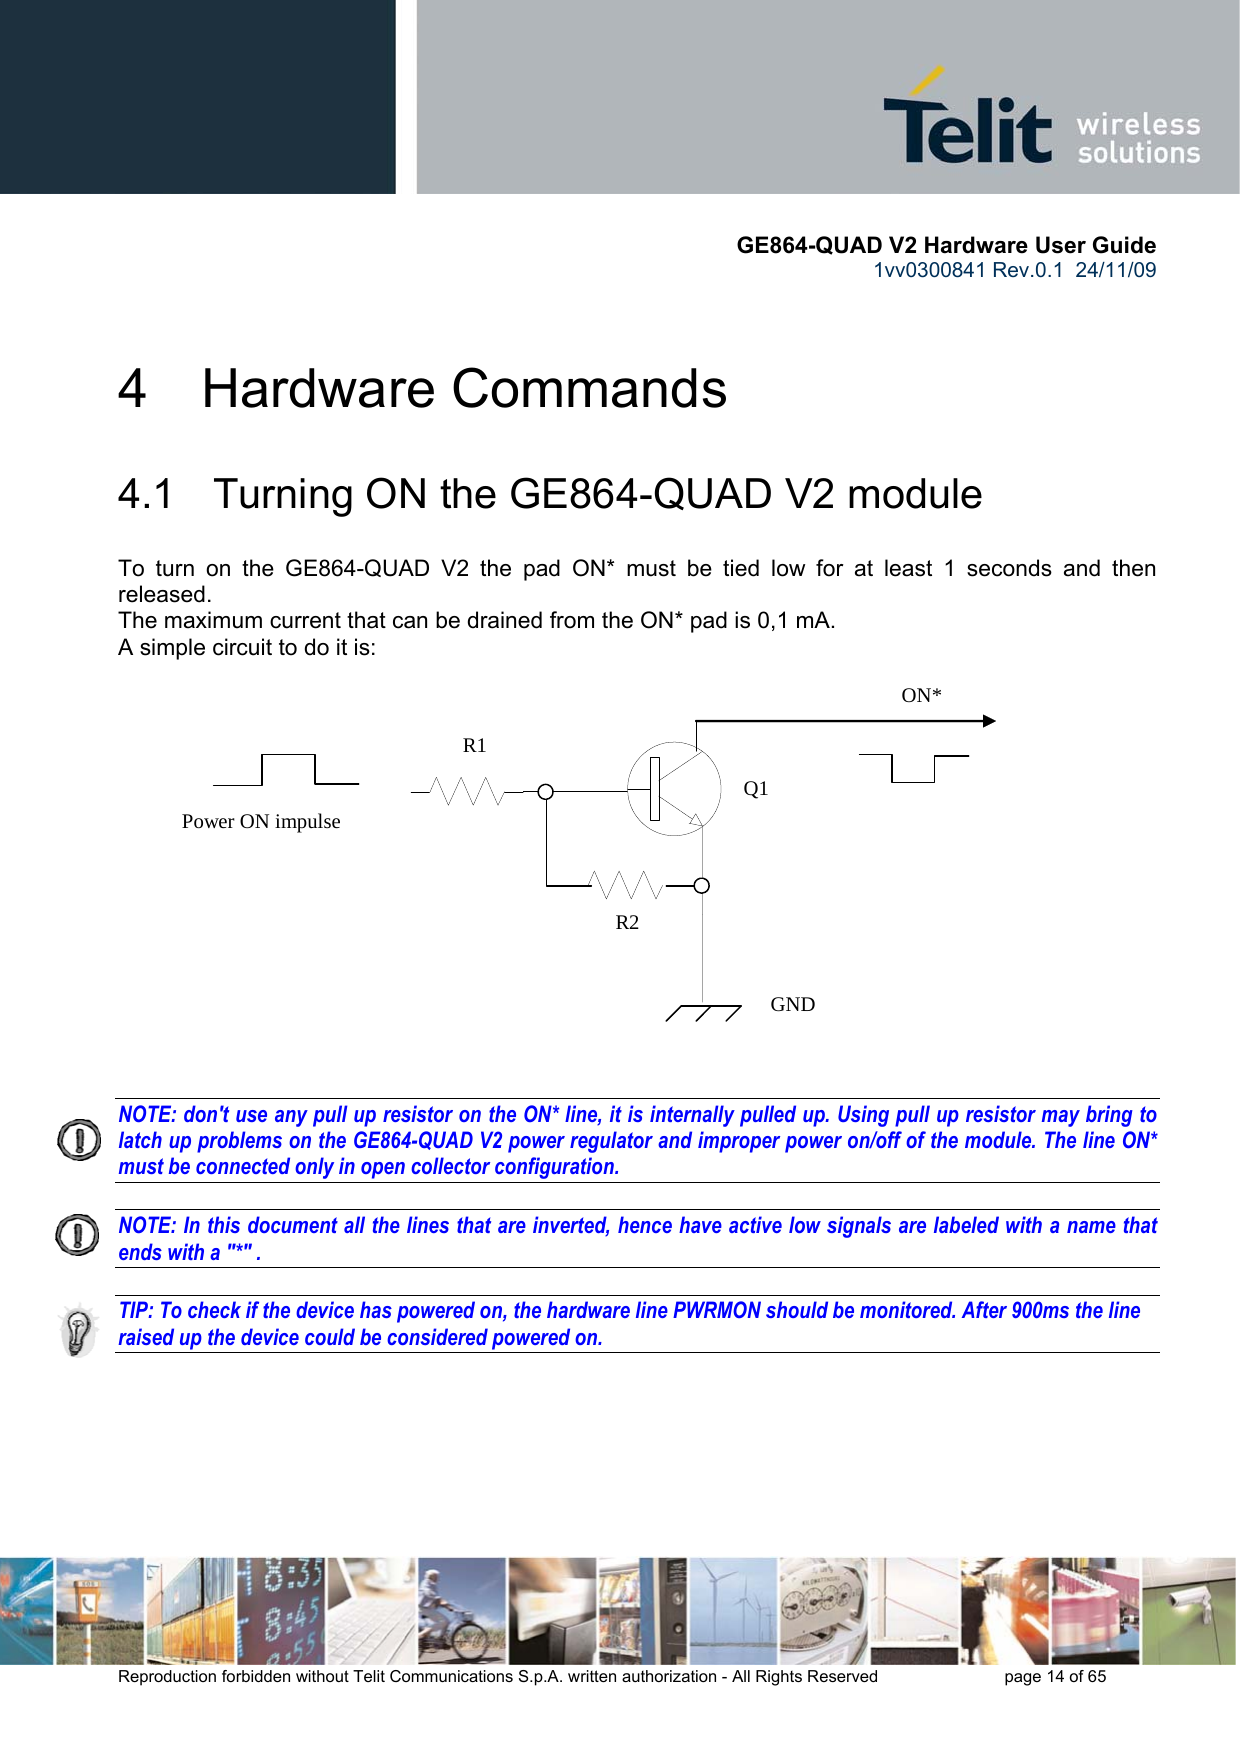       GE864-QUAD V2 Hardware User Guide 1vv0300841 Rev.0.1  24/11/09      Reproduction forbidden without Telit Communications S.p.A. written authorization - All Rights Reserved    page 14 of 65  4  Hardware Commands 4.1   Turning ON the GE864-QUAD V2 module To turn on the GE864-QUAD V2 the pad ON* must be tied low for at least 1 seconds and then released. The maximum current that can be drained from the ON* pad is 0,1 mA. A simple circuit to do it is:   NOTE: don&apos;t use any pull up resistor on the ON* line, it is internally pulled up. Using pull up resistor may bring to latch up problems on the GE864-QUAD V2 power regulator and improper power on/off of the module. The line ON* must be connected only in open collector configuration.  NOTE: In this document all the lines that are inverted, hence have active low signals are labeled with a name that ends with a &quot;*&quot; .  TIP: To check if the device has powered on, the hardware line PWRMON should be monitored. After 900ms the line raised up the device could be considered powered on.      ON* Power ON impulse   GND R1 R2 Q1 